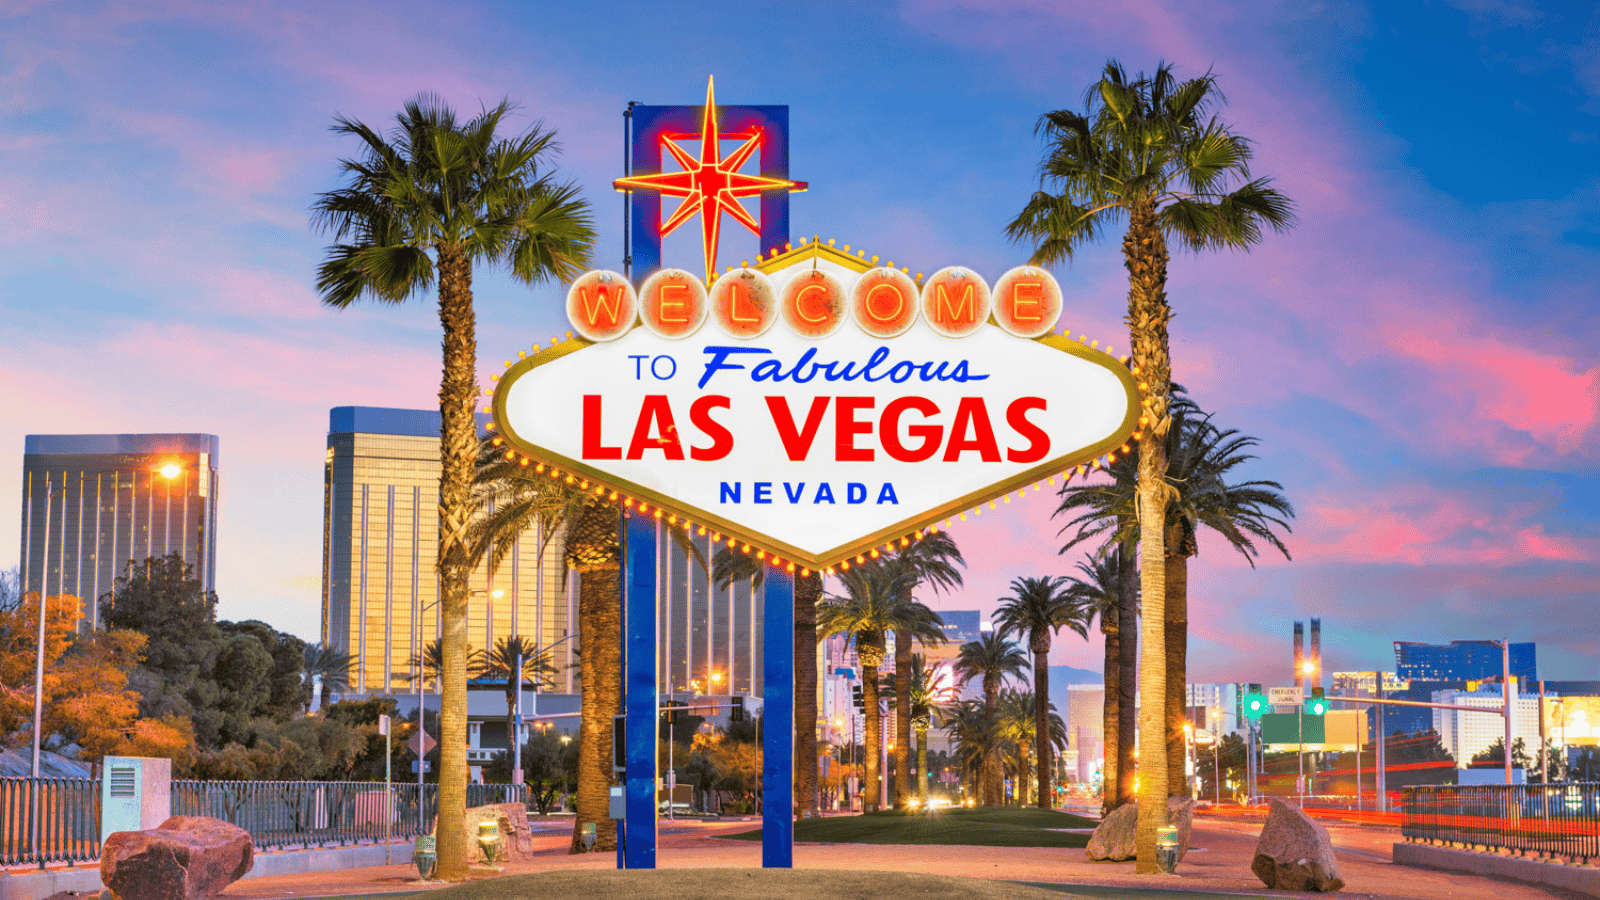 <p>Las Vegas and Dubai are premier desert locales for lavish entertainment and world-famous landmarks. There are always new and thrilling <a href="https://whatthefab.com/unique-las-vegas-things-to-do.html" rel="follow">things to do in Las Vegas</a>, including seasonal events and acclaimed performances.</p><p>Treat yourself to an opulent stay at one of Las Vegas’s many exceptional hotels. When you’re ready for excitement, head to the Strip, a neon oasis lined with casinos, restaurants, and live music venues.</p>